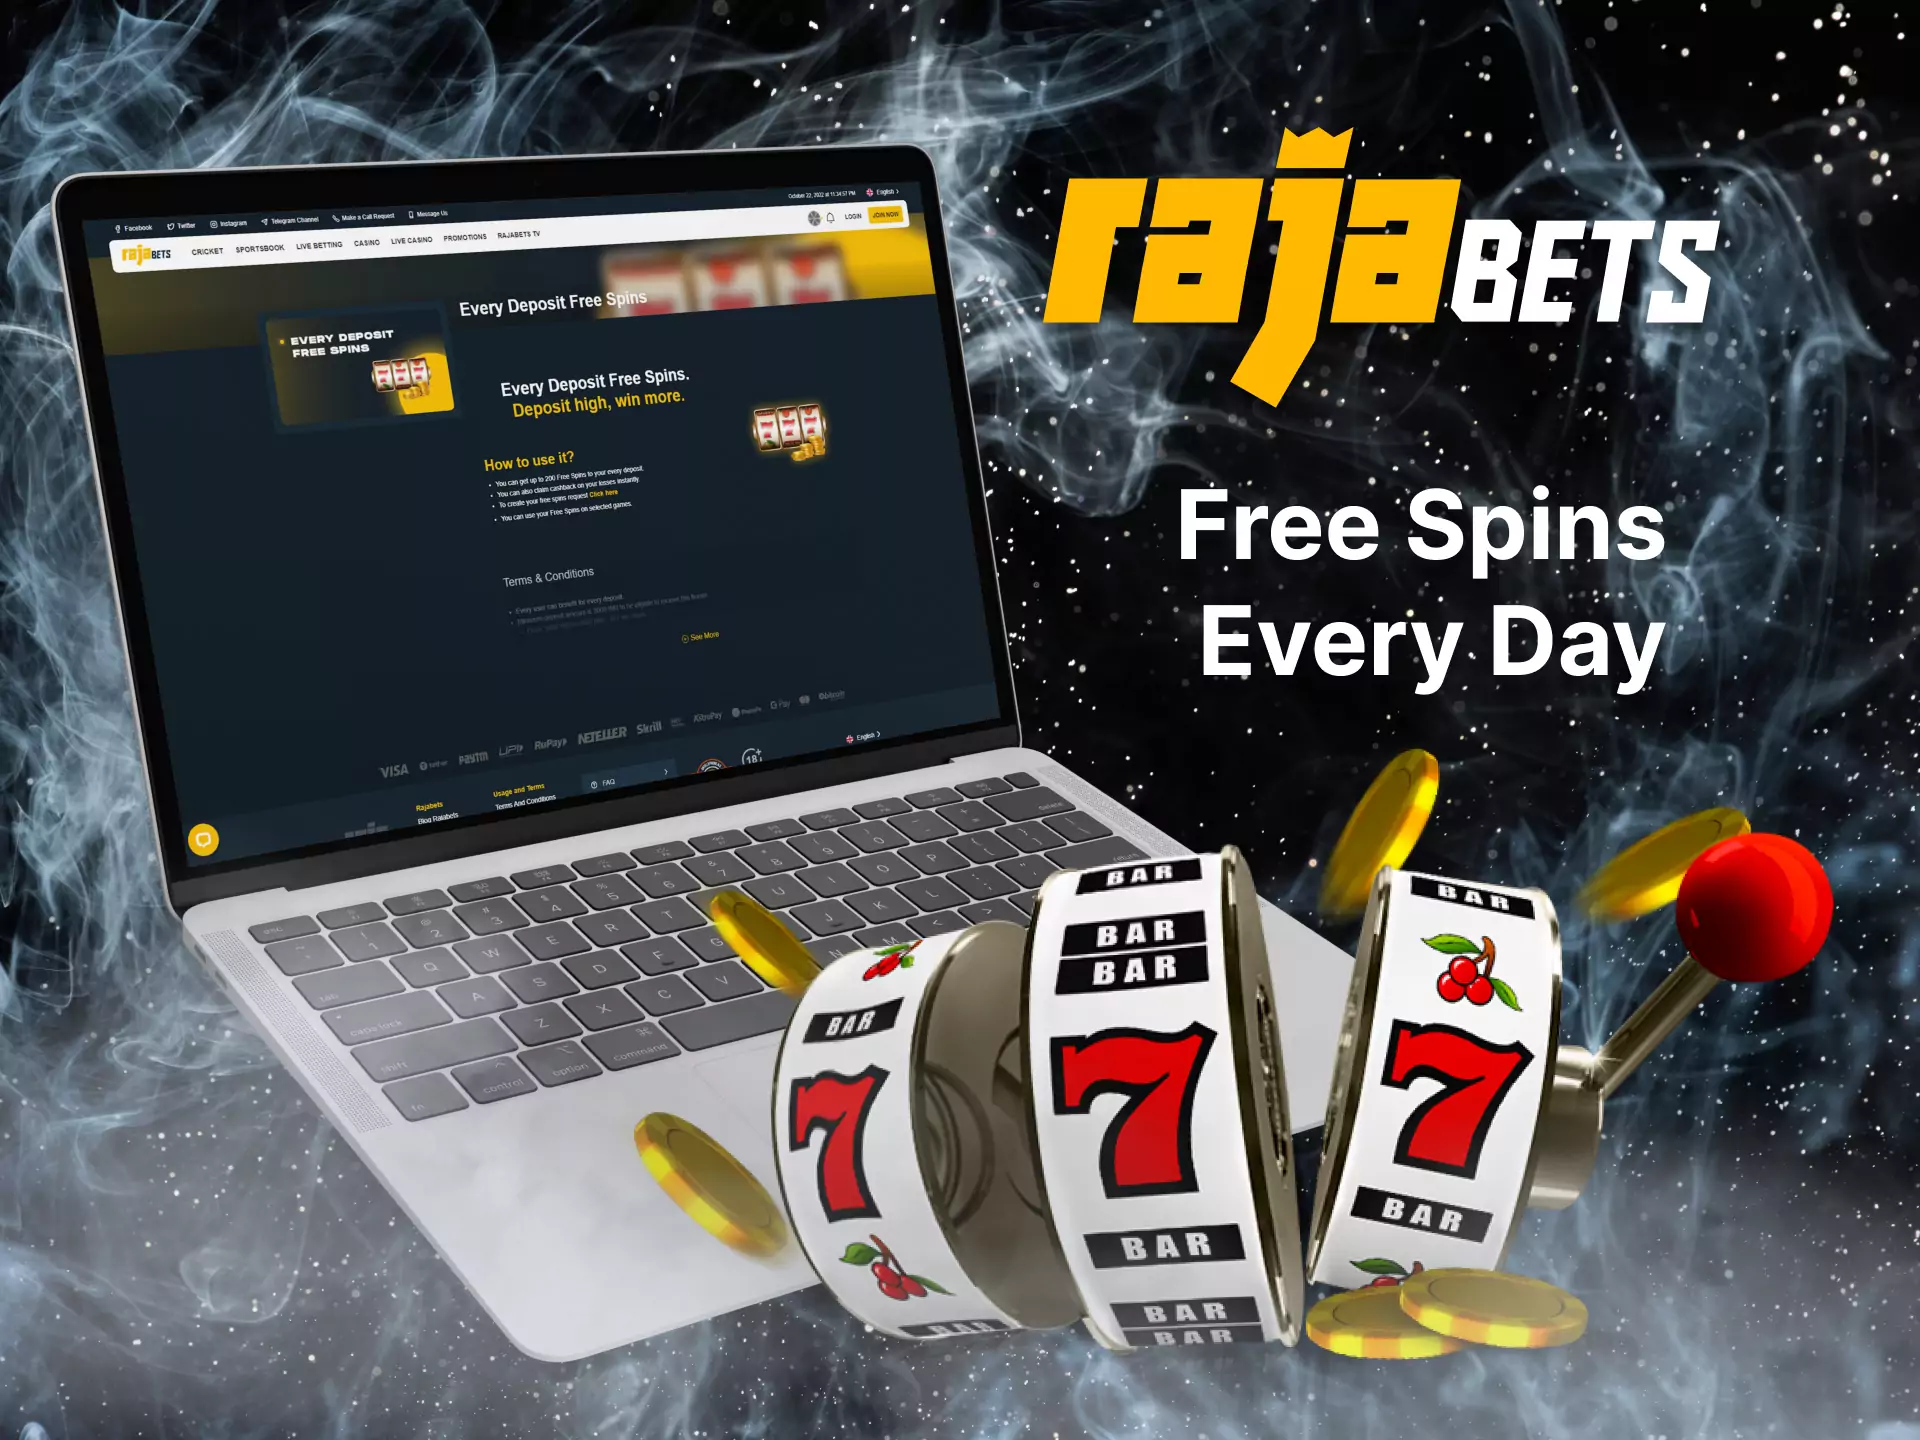 Learn how to use the free spins special bonus in Rajabets.